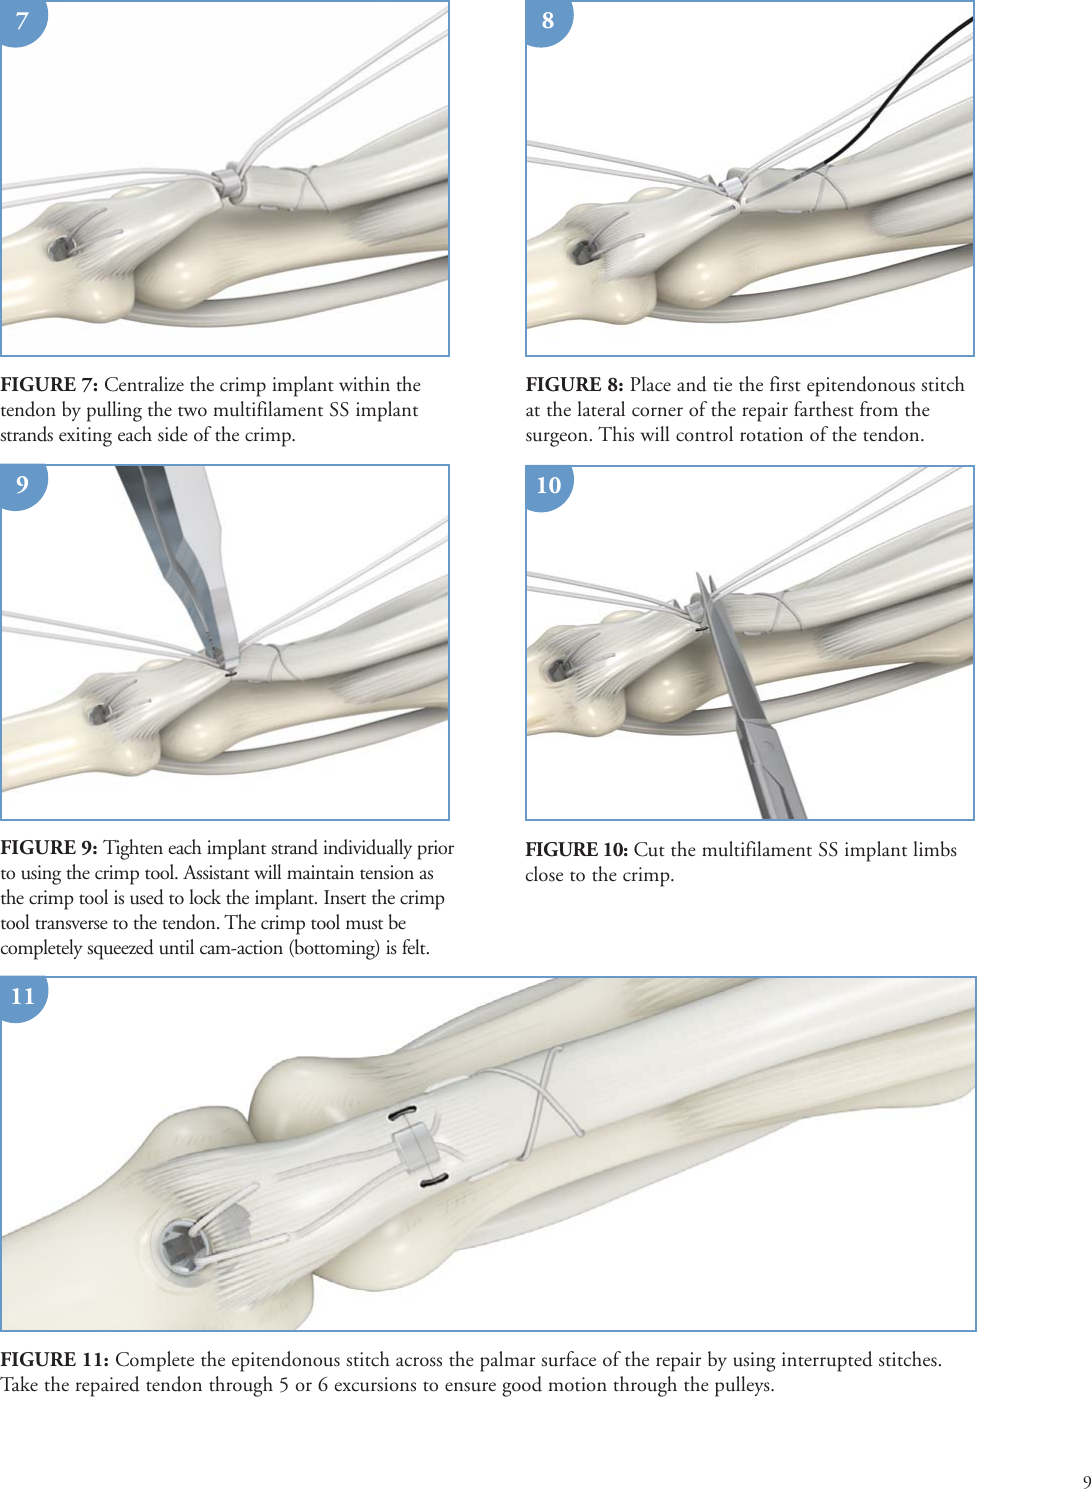 Page 9 of 9 - Print  PONTi S Surgical Technique Brochure 08Oct15